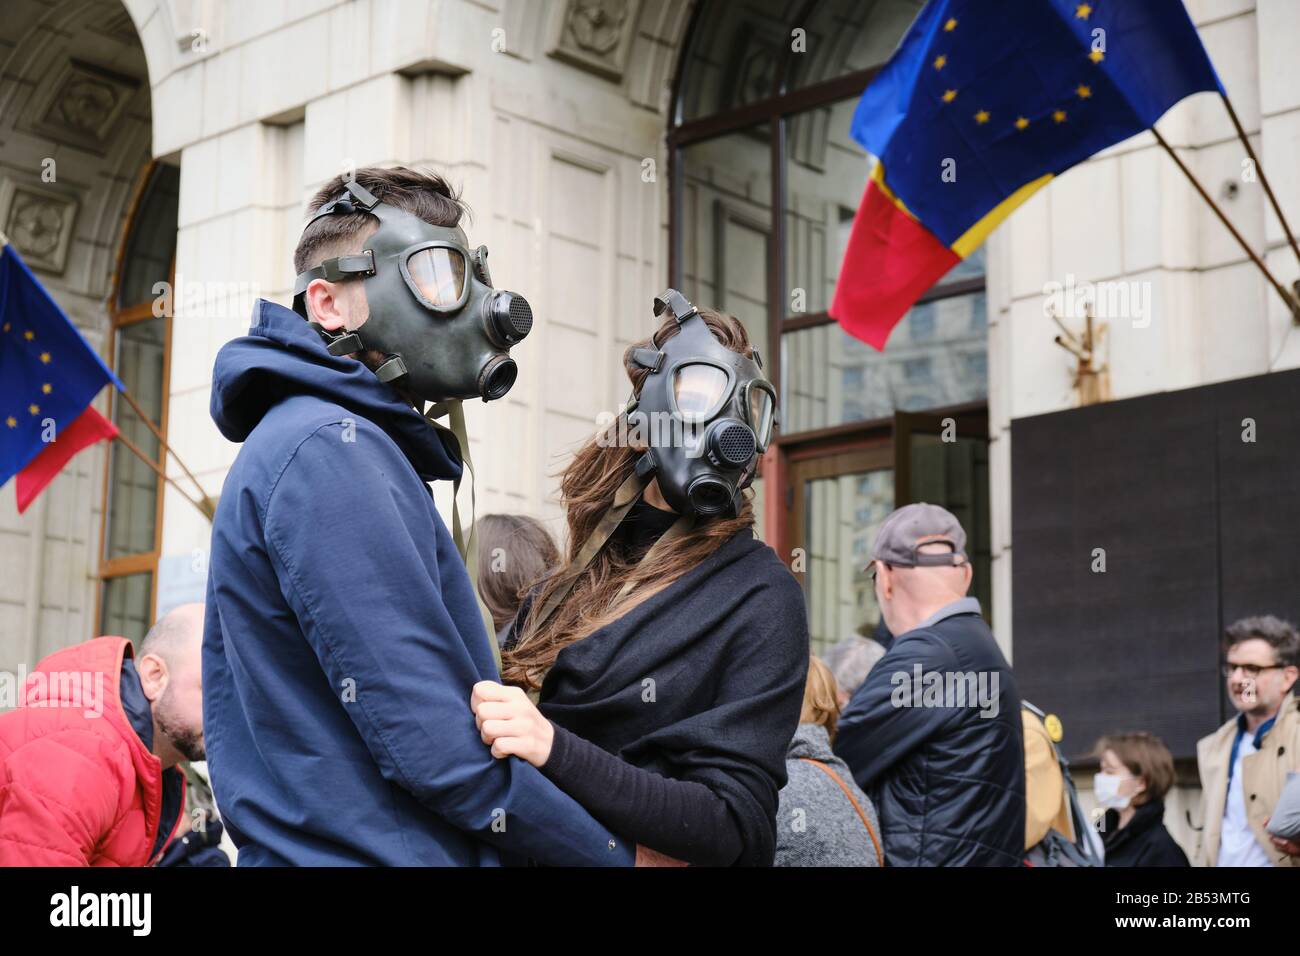 Bucharest, Romania - March 4, 2020: Couple wearing gas masks in protest for extreme air pollution, in front of the Ministry of Environment building, w Stock Photo